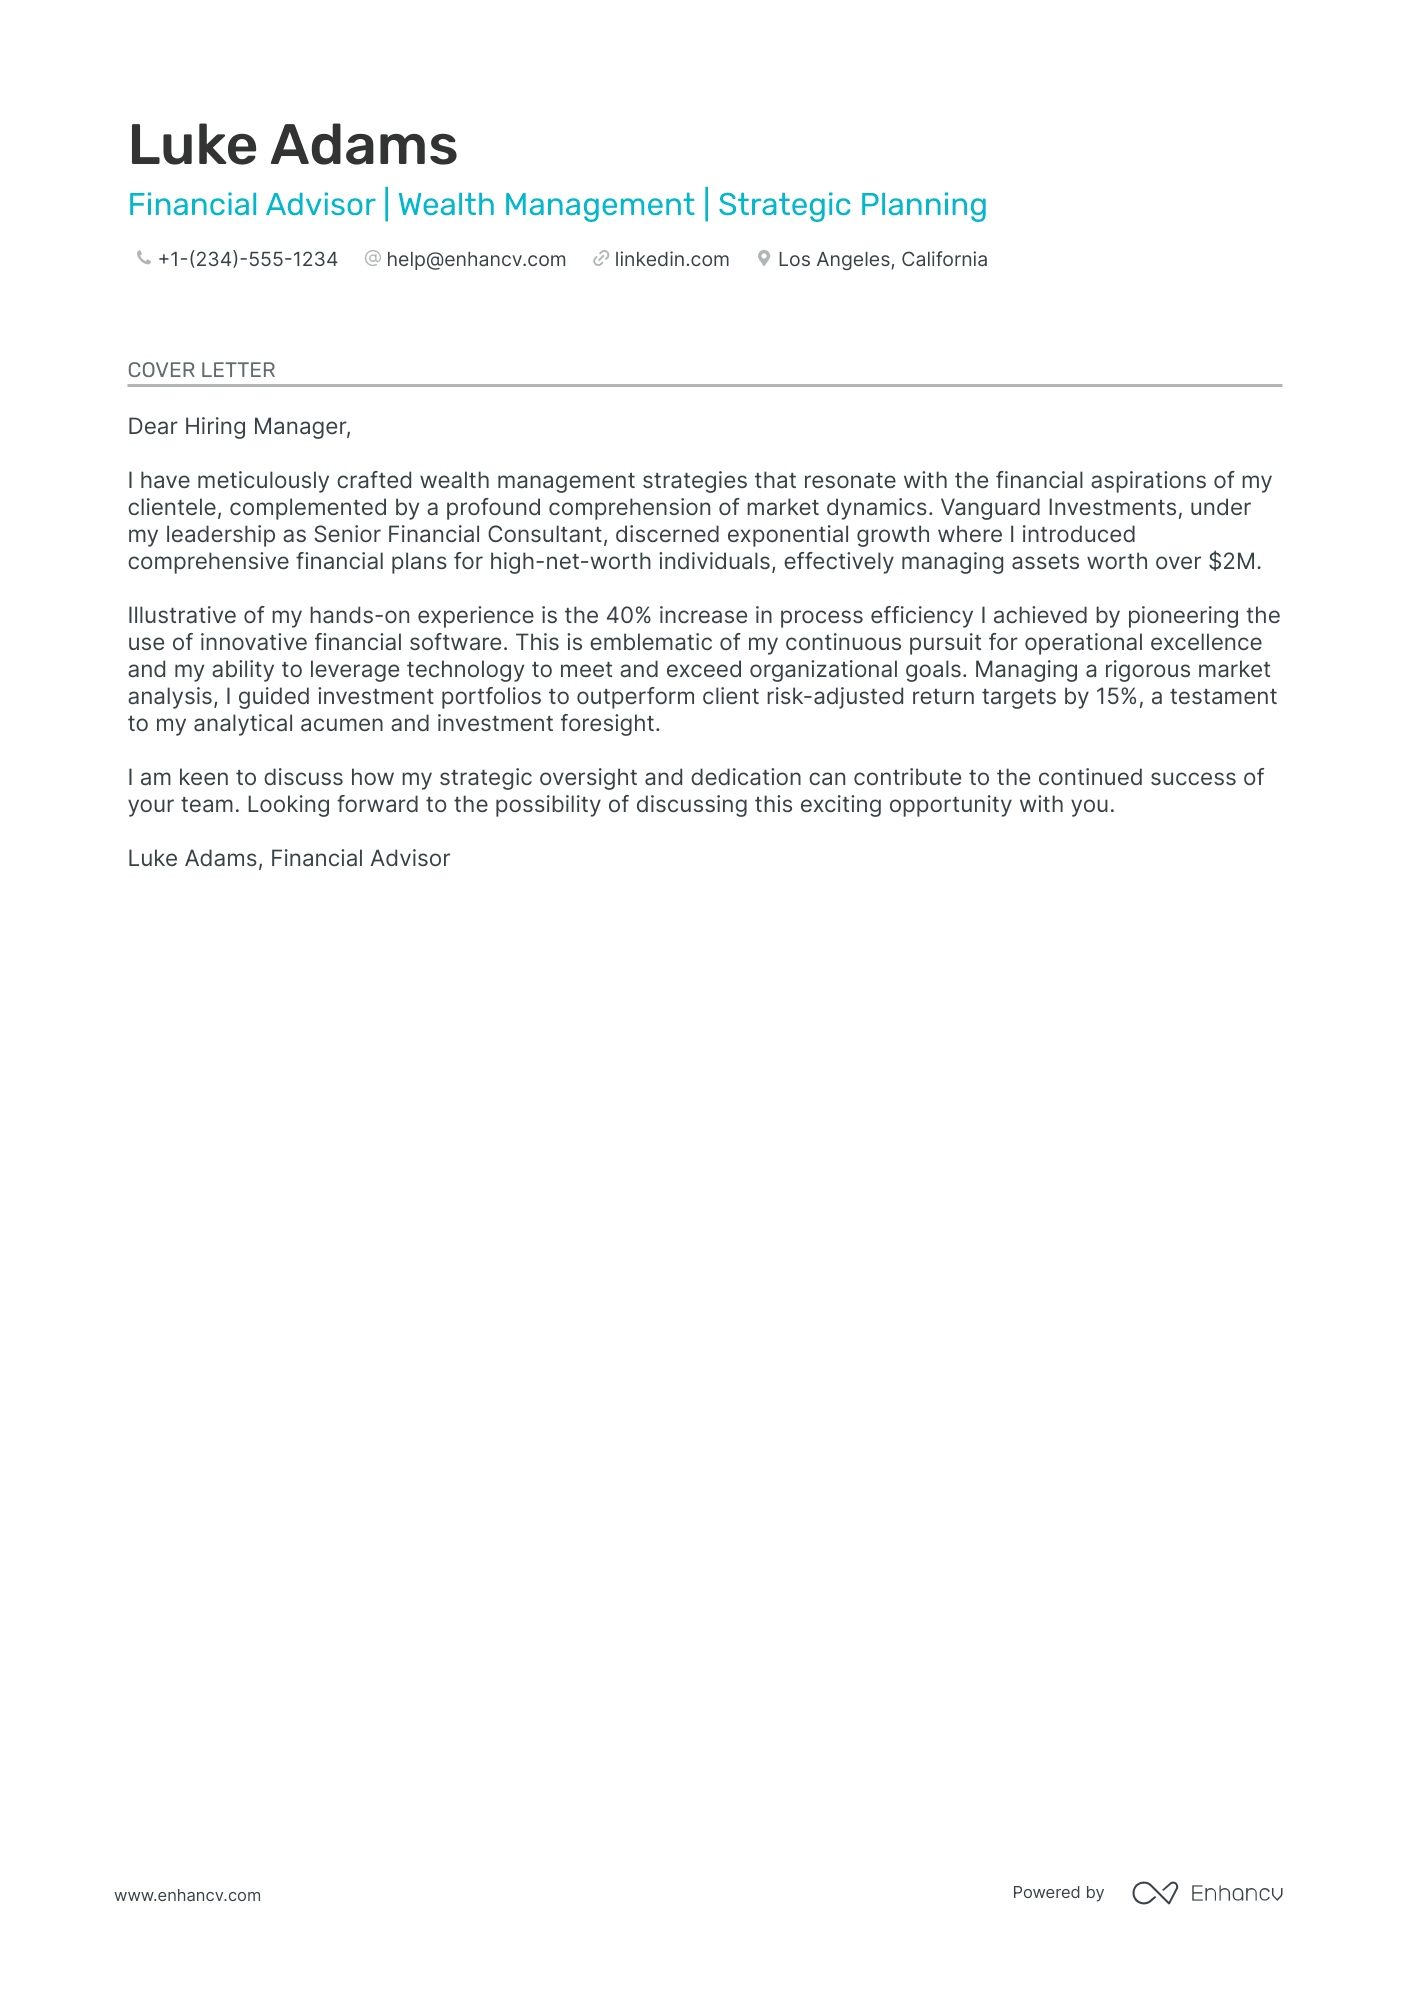 Financial Professional cover letter